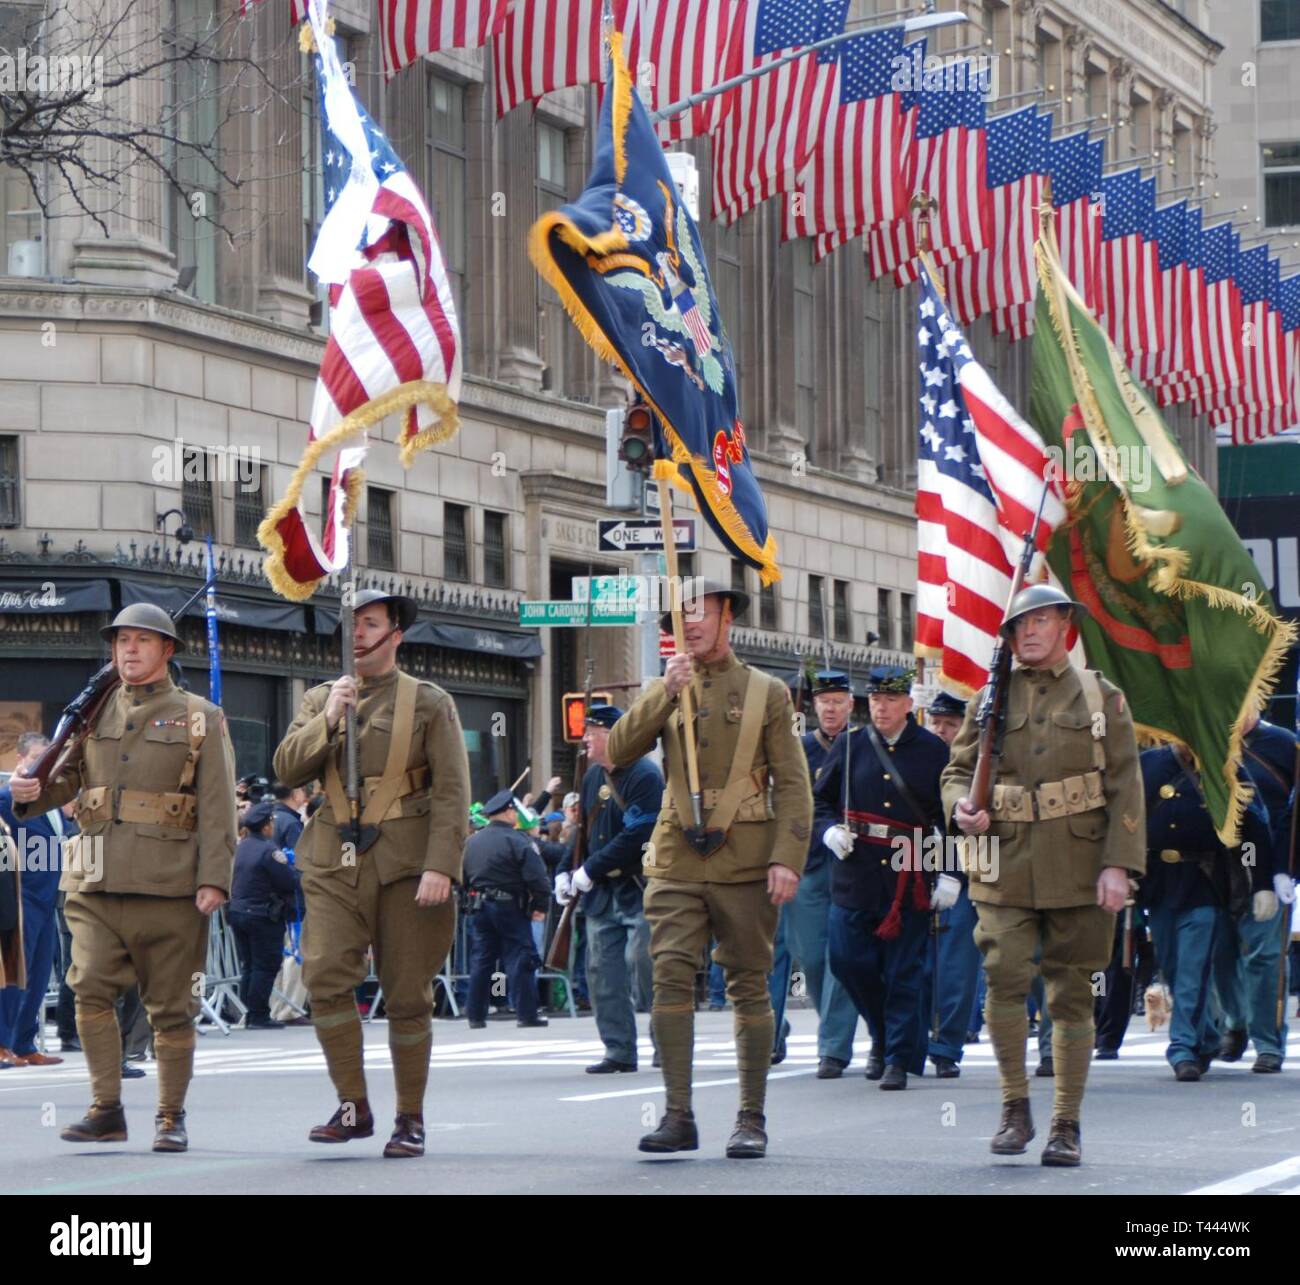 Members of the East Coast Doughboy's, historical reenactors who dress as Soldiers in the 69th Infantry Regiment during World War I follow the New York National Guard's 1st Battalion, 69th Infantry during the New York City St. Patrick's Day Parade on March 16, 2019. The 1st Battalion, 69th Infantry traditionally leads the world's largest St. Patrick's Day Parade. Soldiers of the 1st Battalion 69th Infantry and the 42nd Infantry Division Band led the parade up 5th Avenue.  ( U.S. Army National Guard Stock Photo